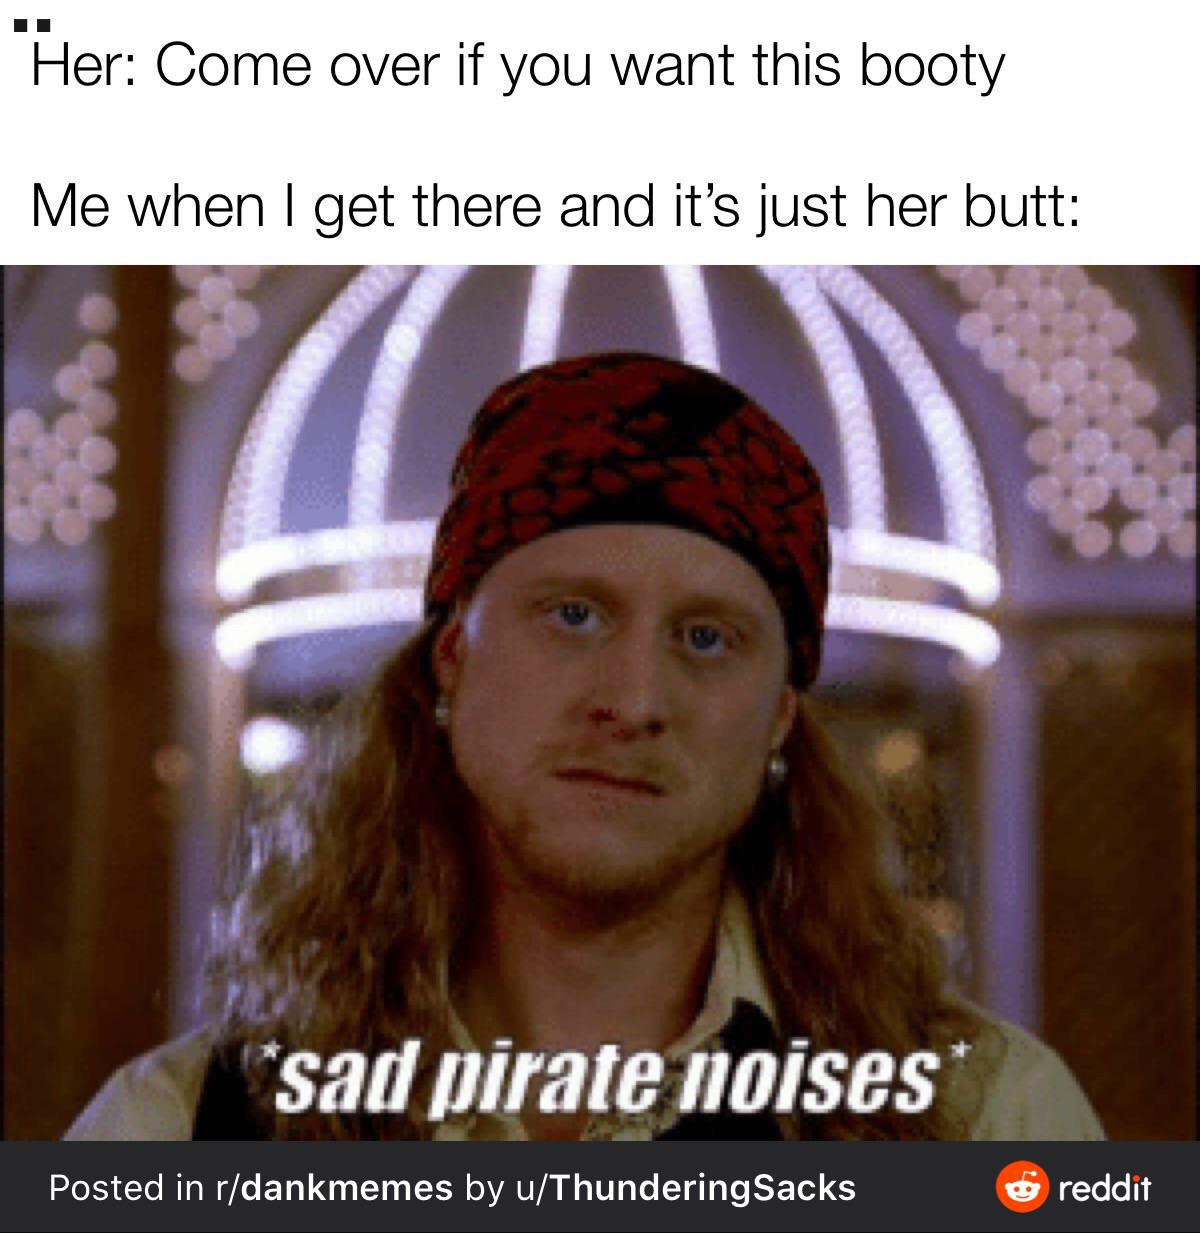 photo caption - Her Come over if you want this booty Me when I get there and it's just her butt sad pirate noises Posted in rdankmemes by uThundering Sacks reddit